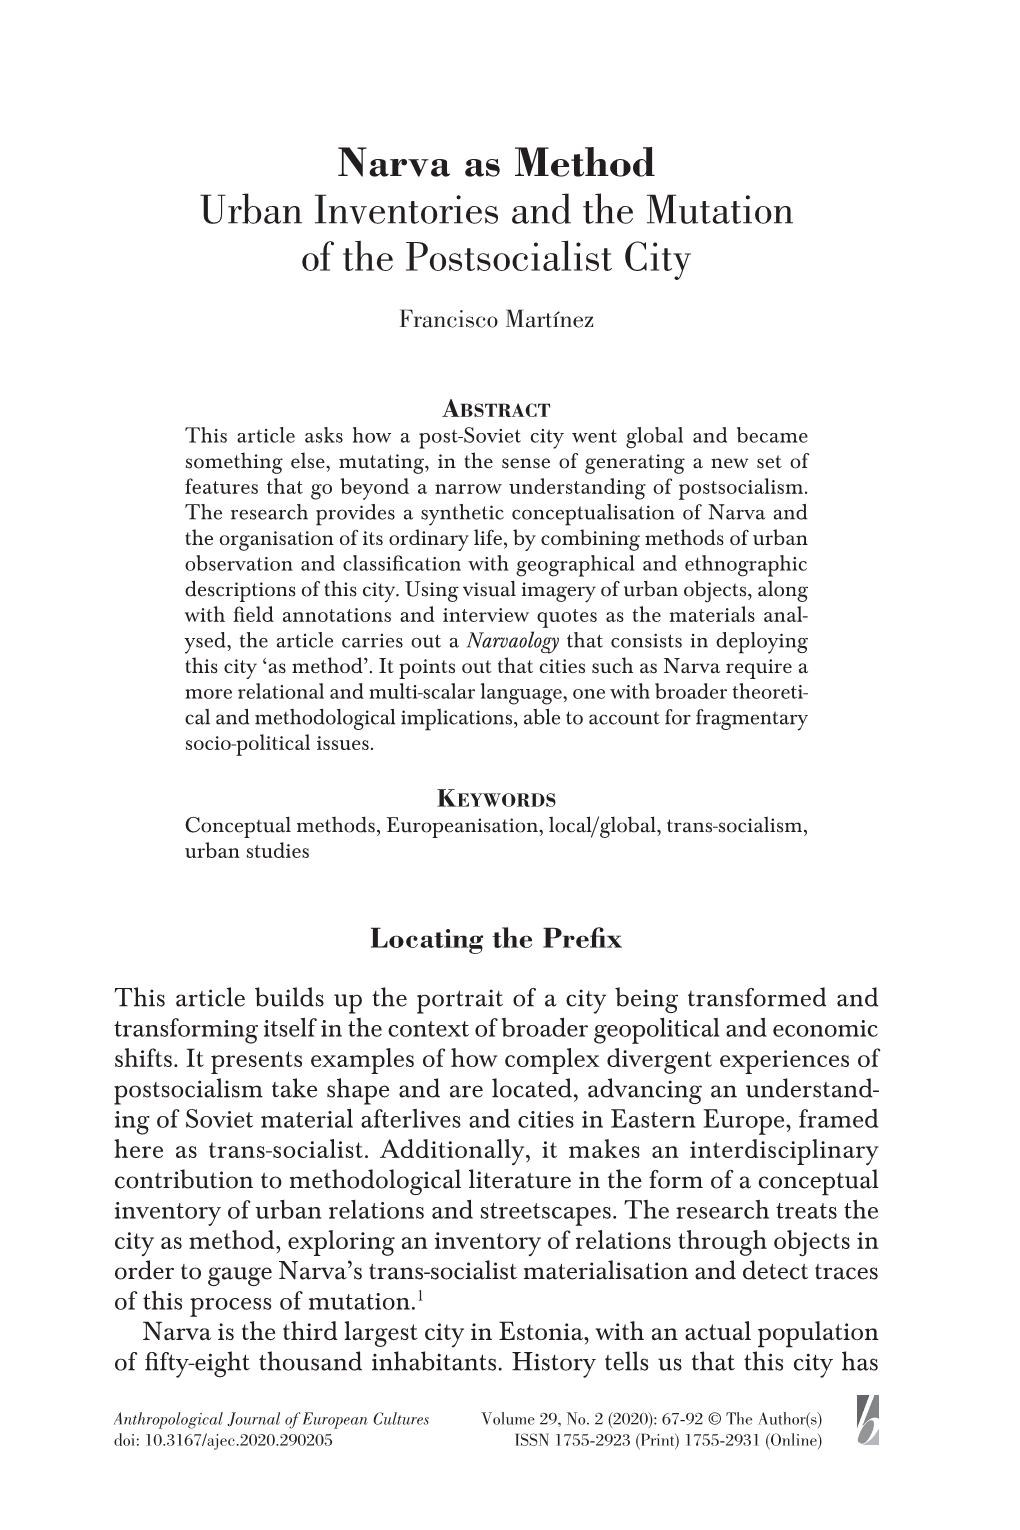 Narva As Method Urban Inventories and the Mutation of the Postsocialist City